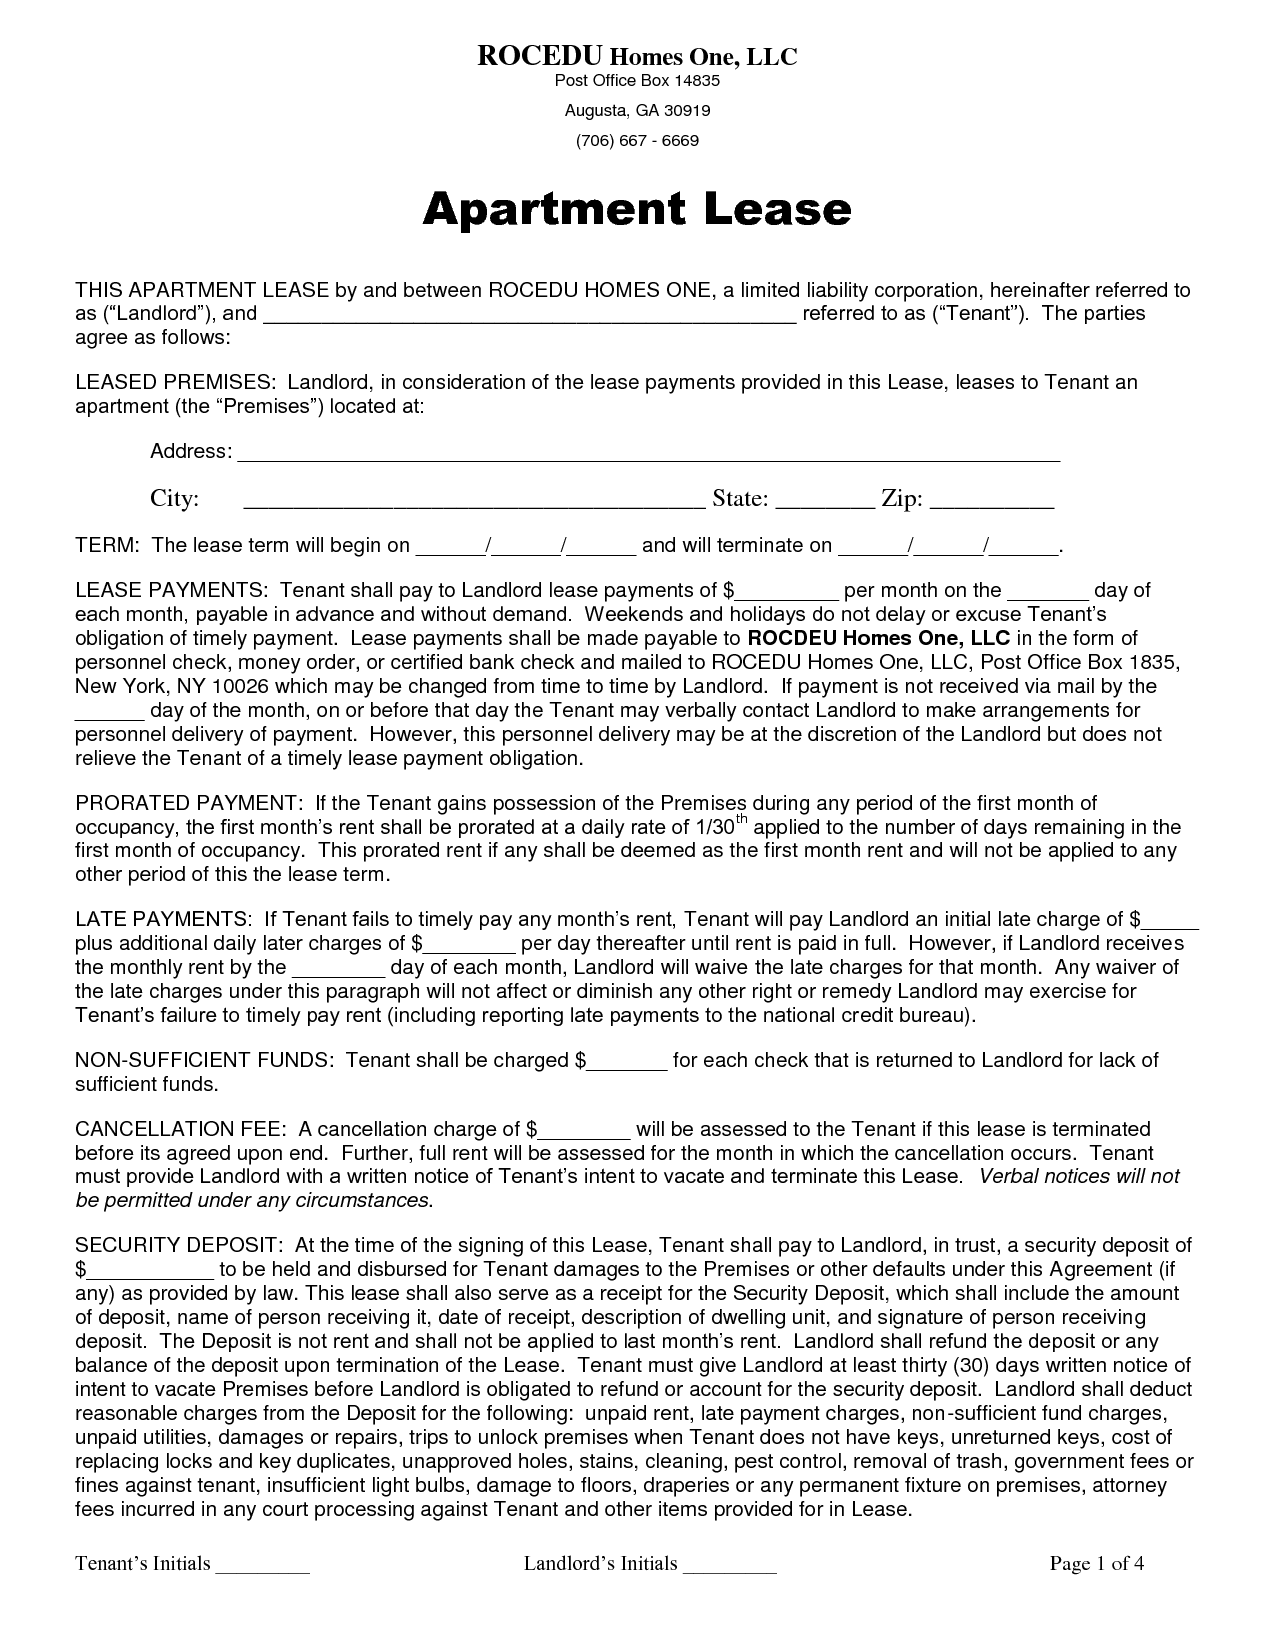 Sample Apartment Lease DOC By Gabyion Apartment Lease Agreement 